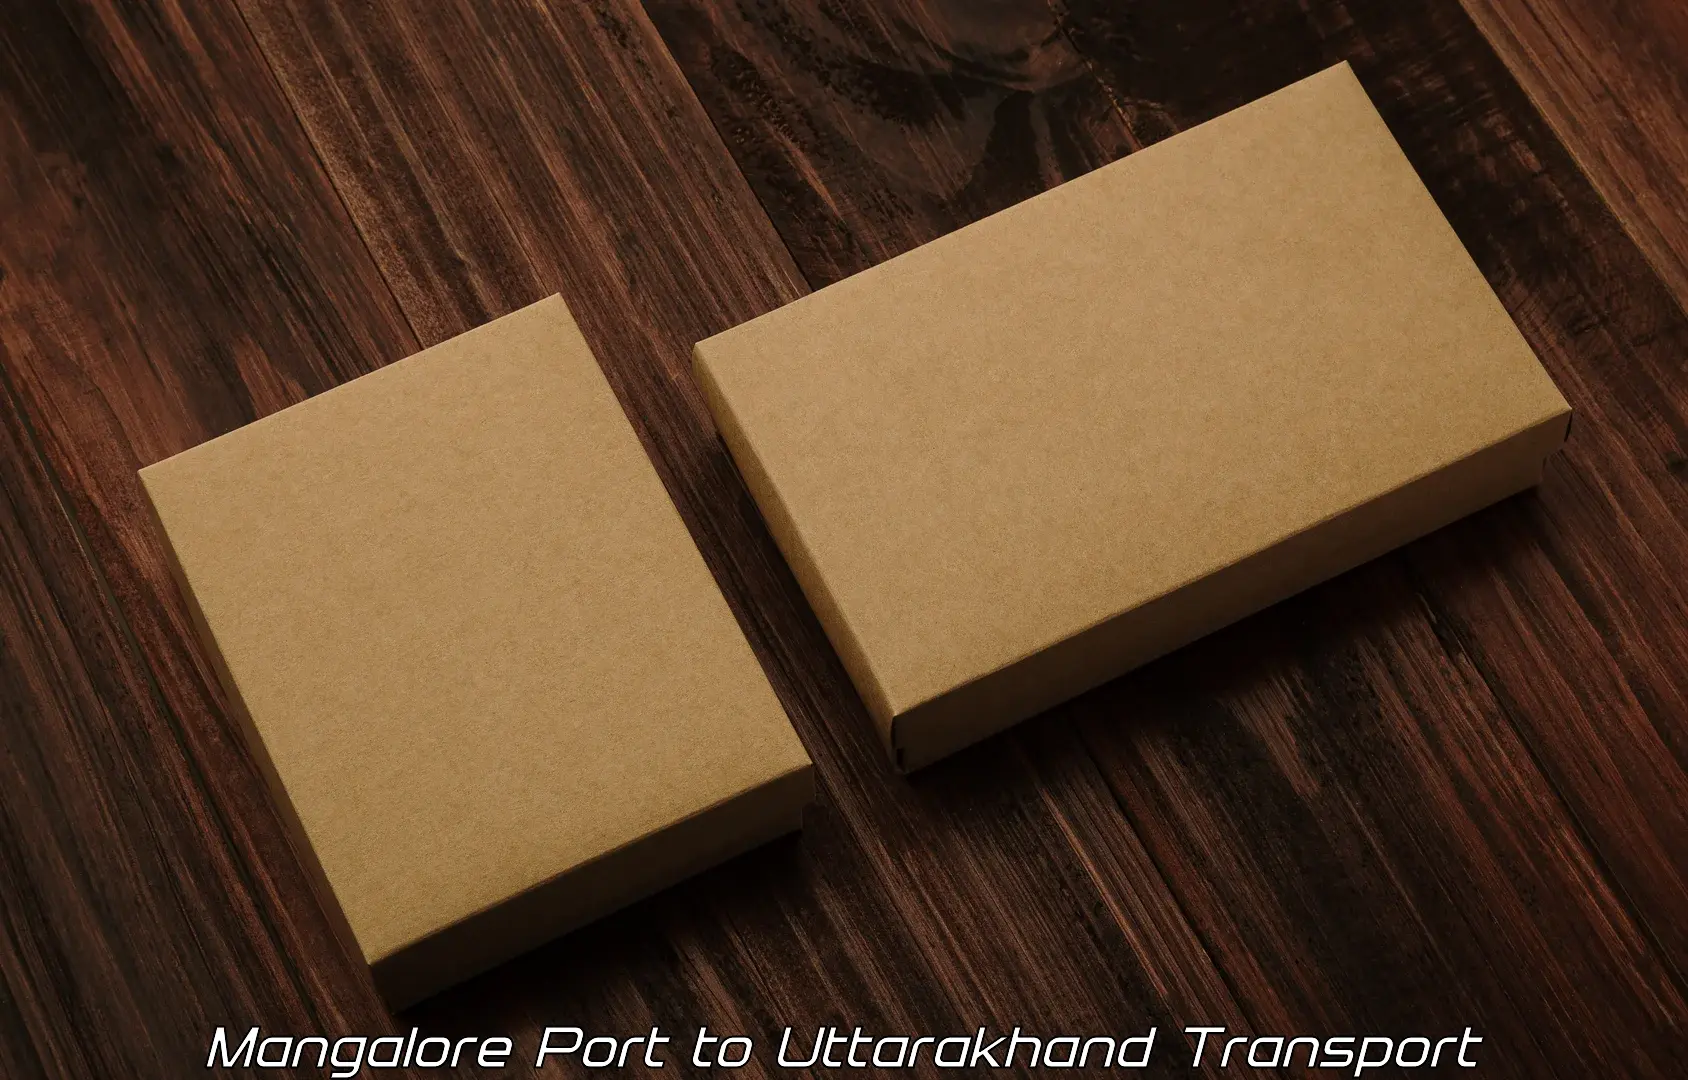 Cargo transportation services Mangalore Port to IIT Roorkee